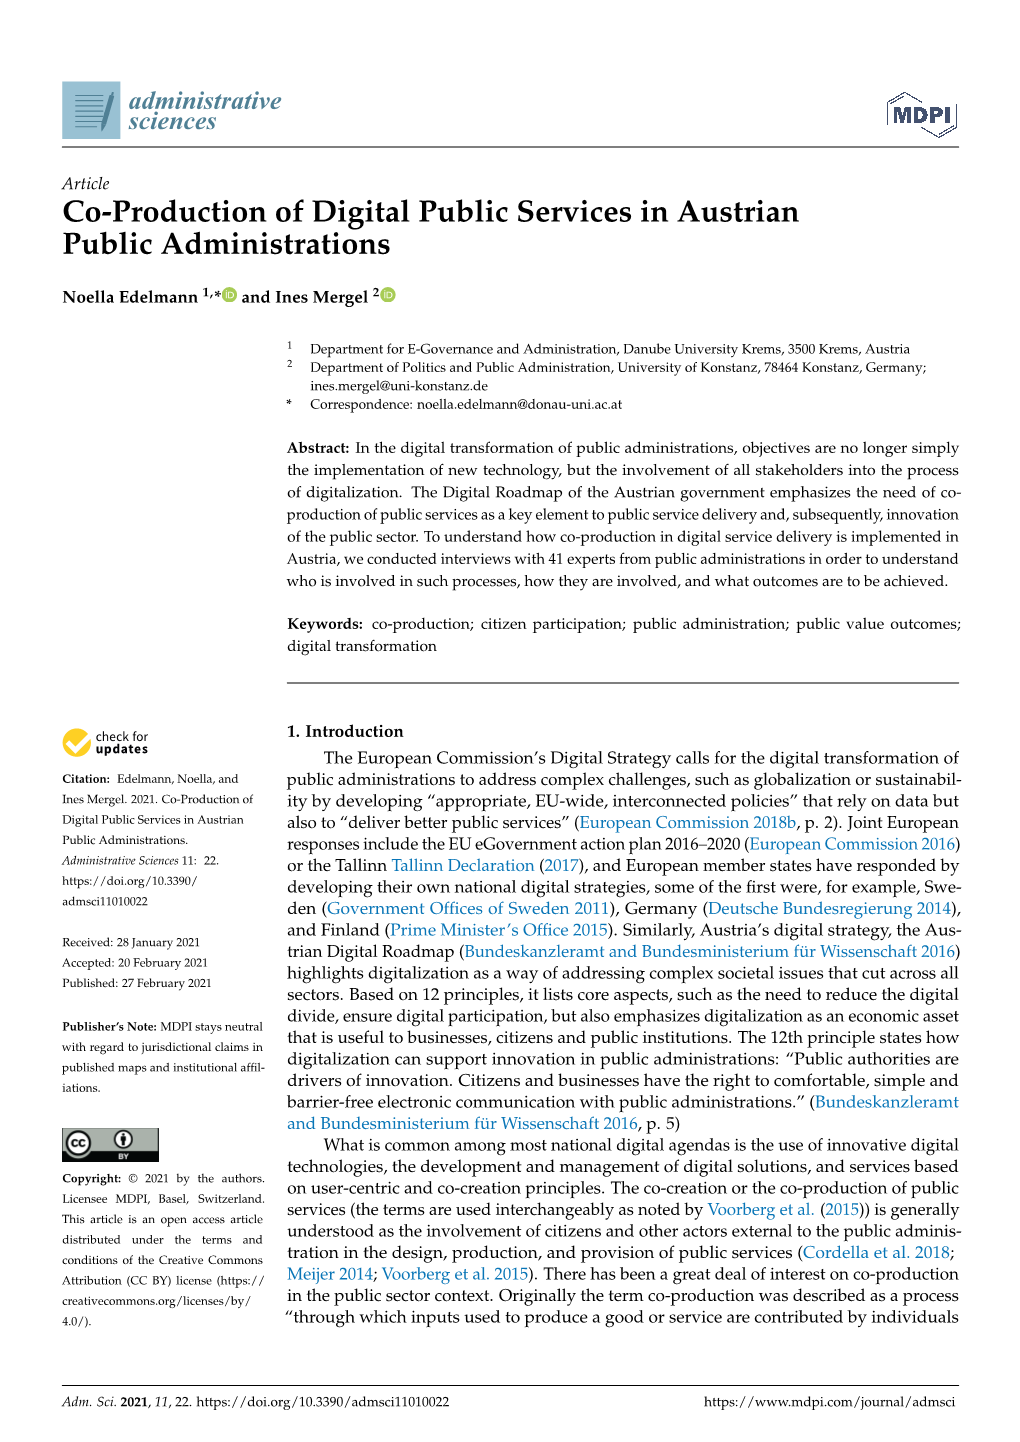 Co-Production of Digital Public Services in Austrian Public Administrations